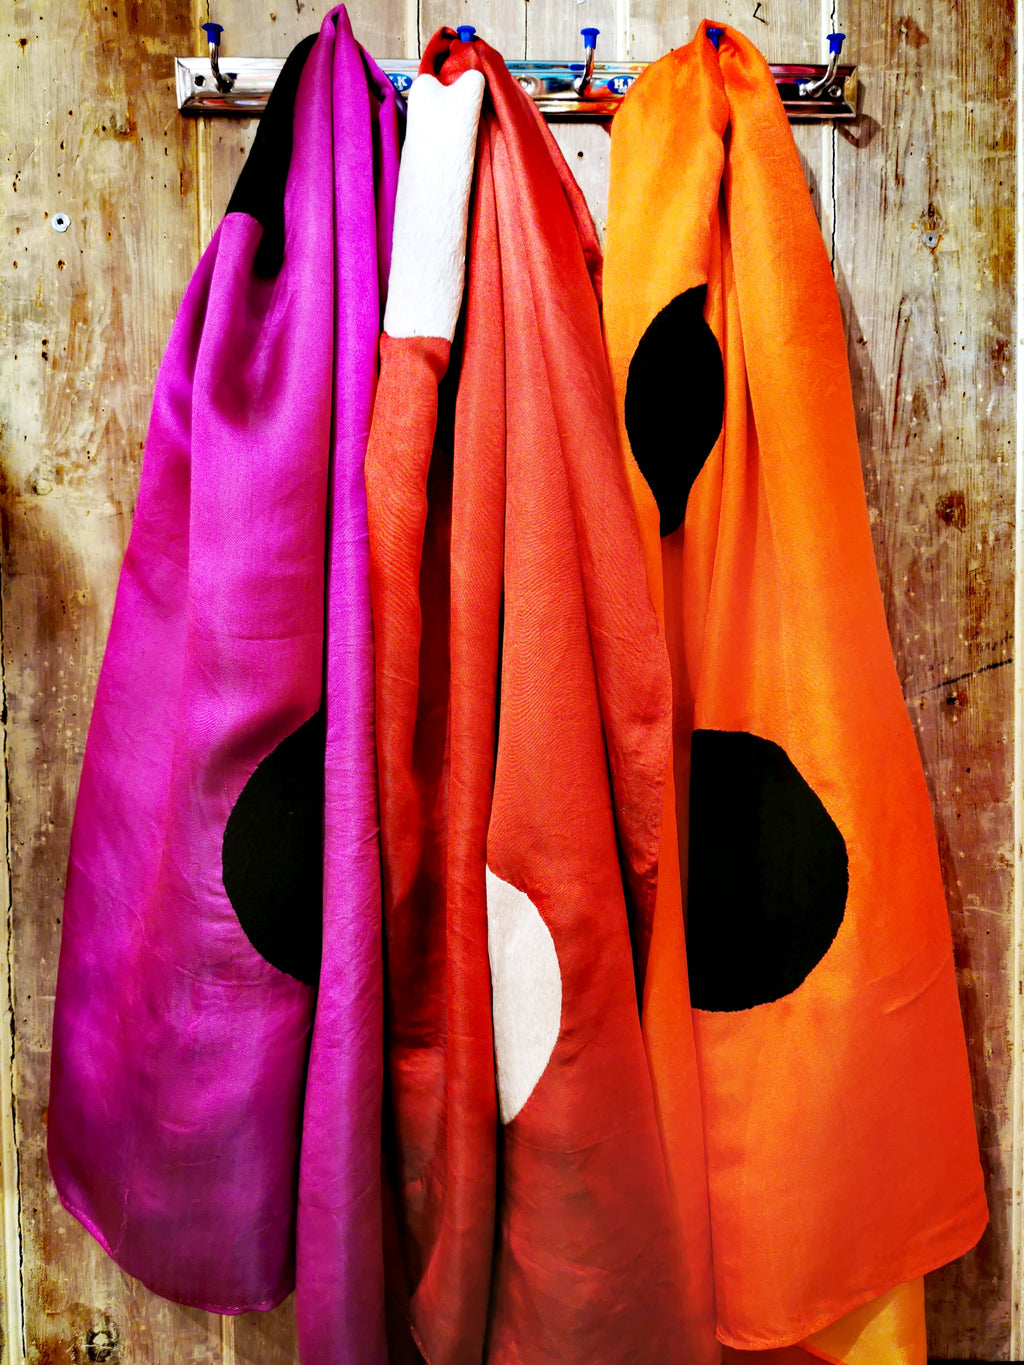 Super luxe silk satin shawls in gorgeous colours woven in Vietnam.Hand embroidered with 3 large polka dots. Long length, so can be wrapped around the neck twice for warmth, thrown over the shoulders or wrapped around the waist as a sarong.

Silk is different colour on the reverse. 

90cm x 180 cm

Hand wash in silk friendly detergent. 

